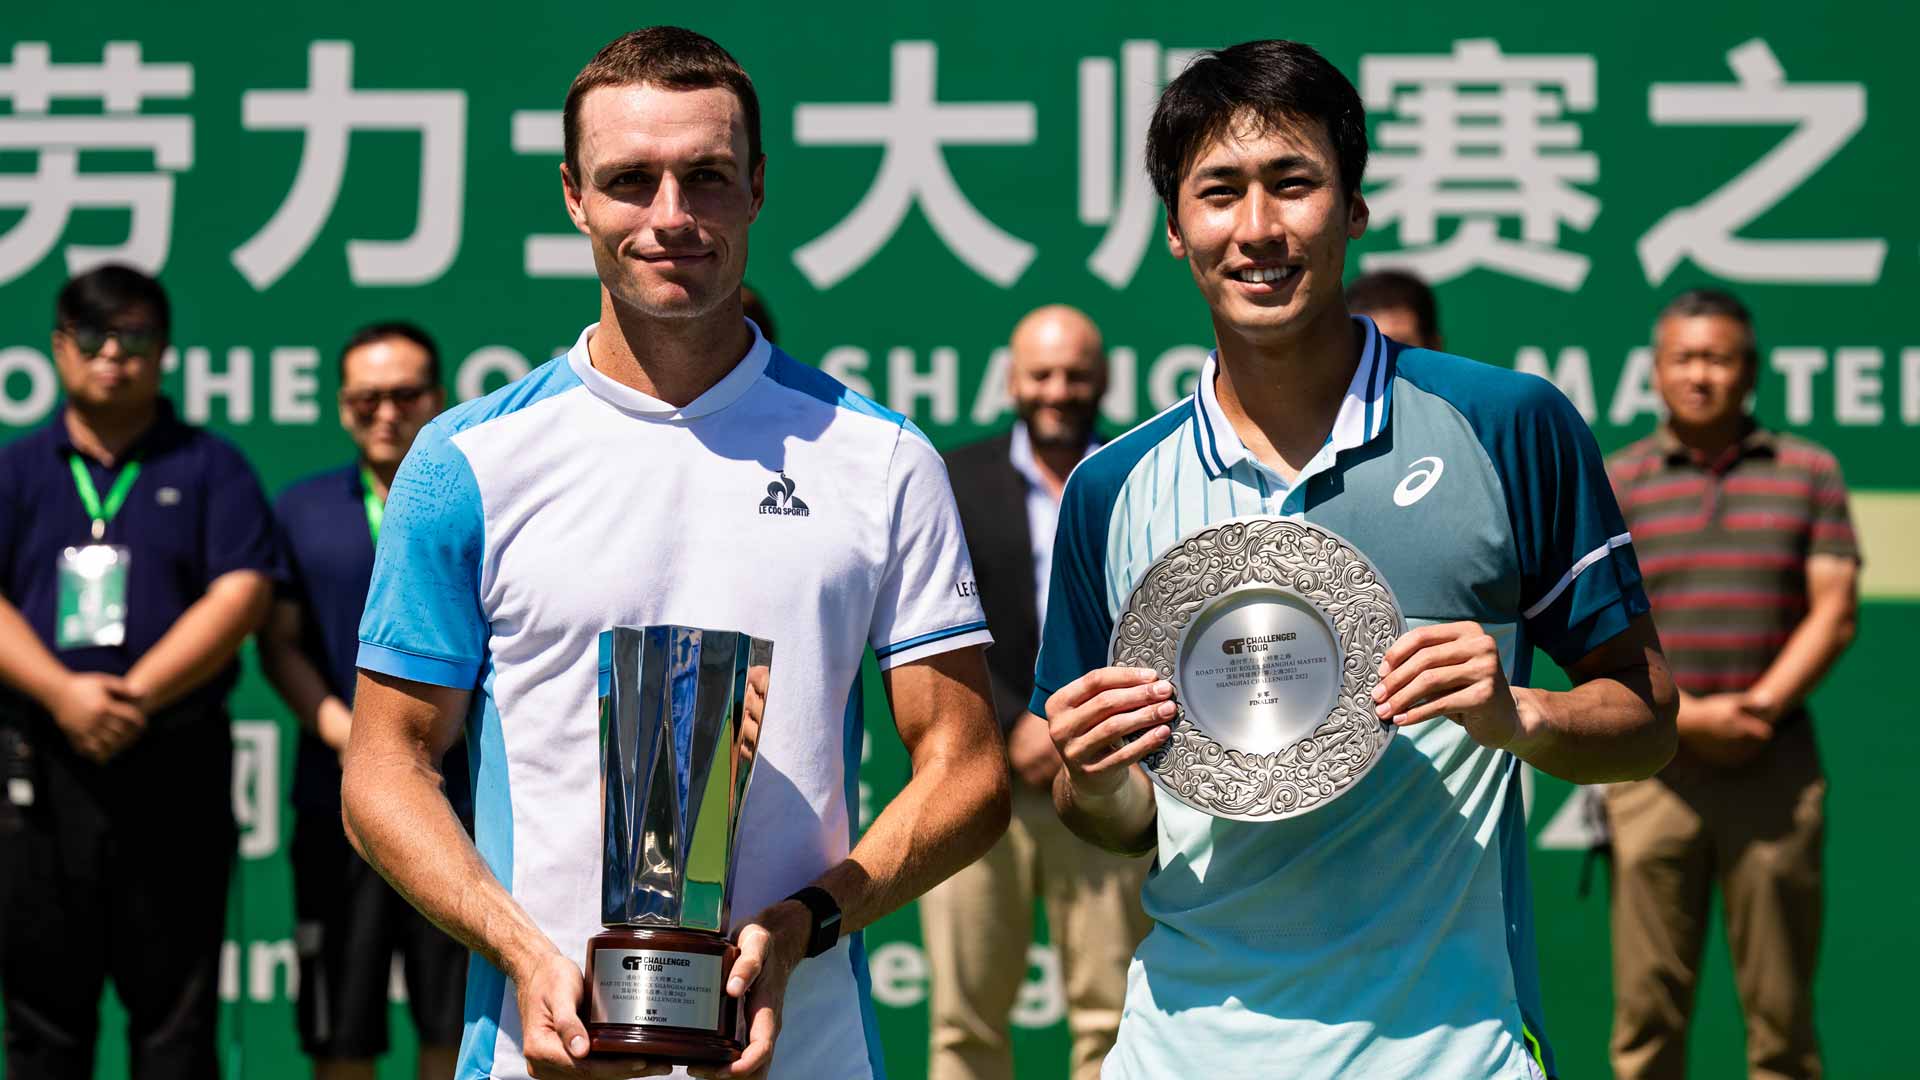 Christopher O'Connell (left) and Yosuke Watanuki at the Shanghai Challenger trophy ceremony.